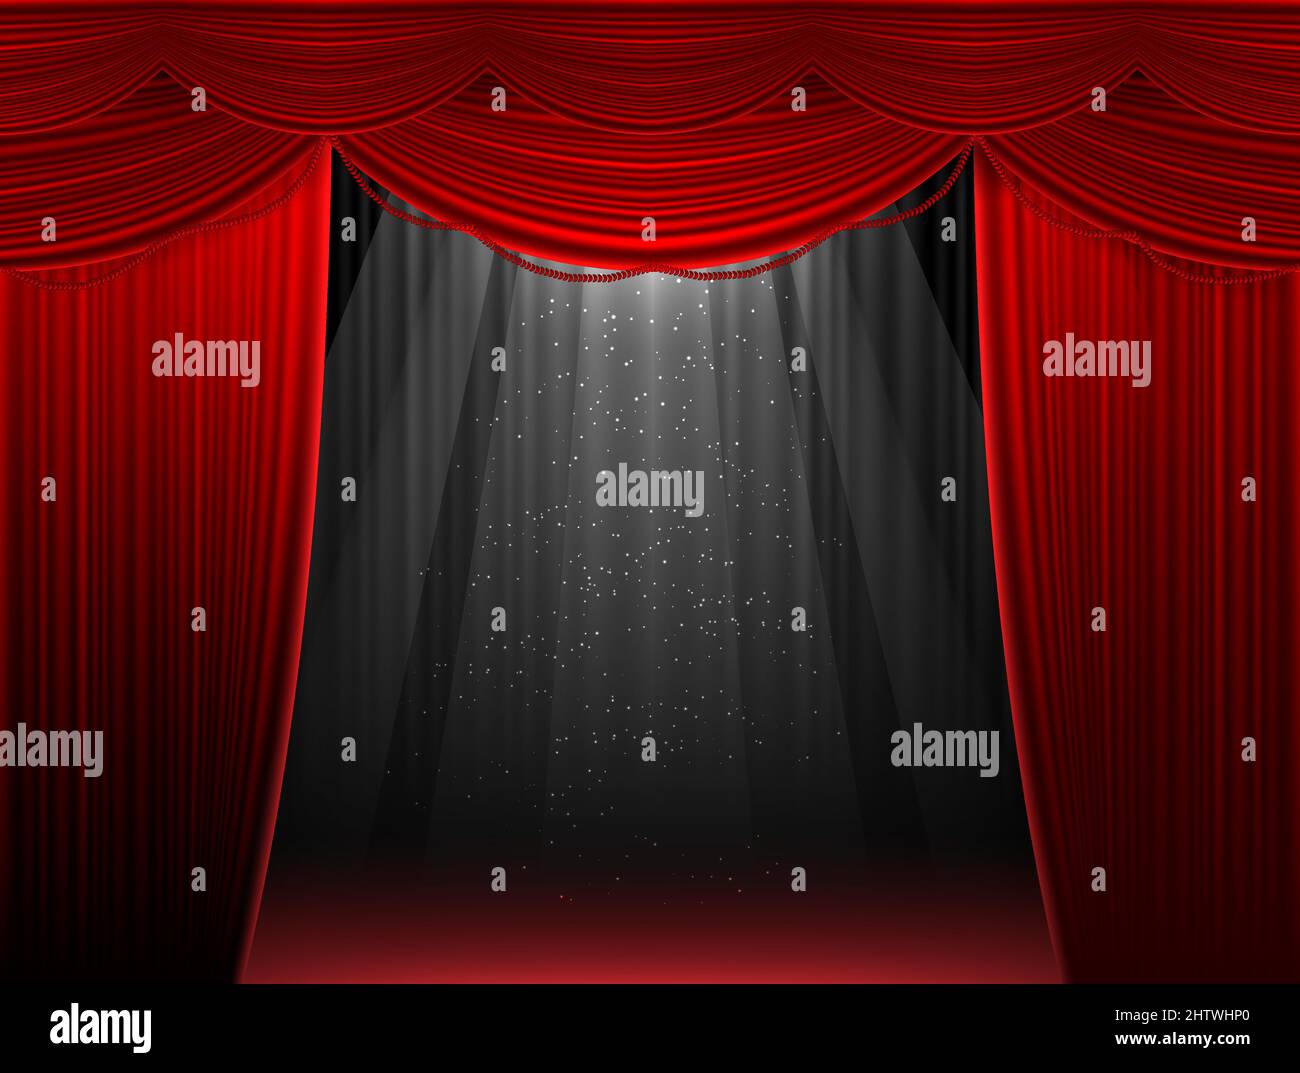 Red stage curtain illustration background Stock Vector